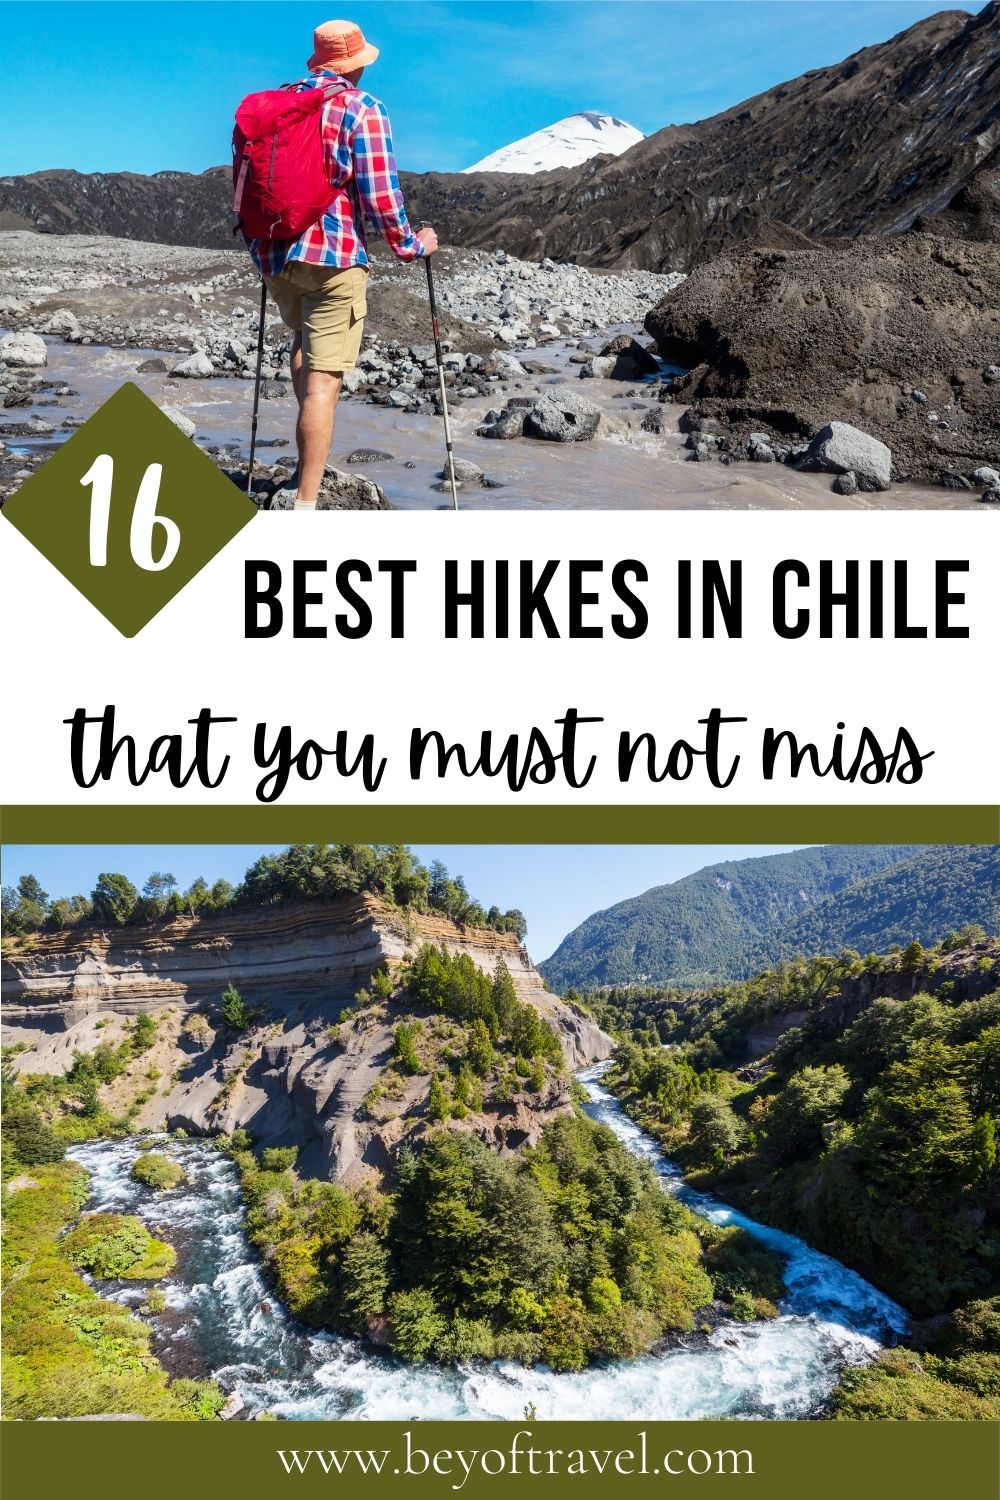 Best hikes in Chile